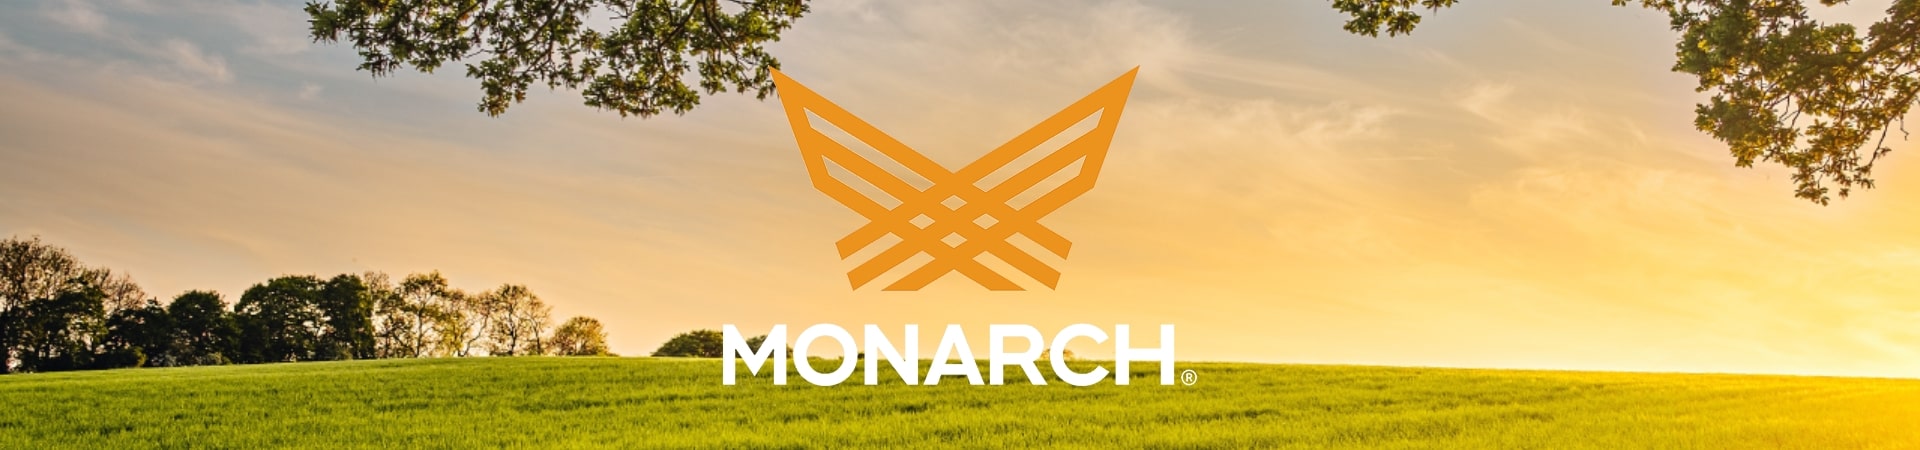 Monarch Tractor’s 2020 Partner Series Applications Open – Sold Out